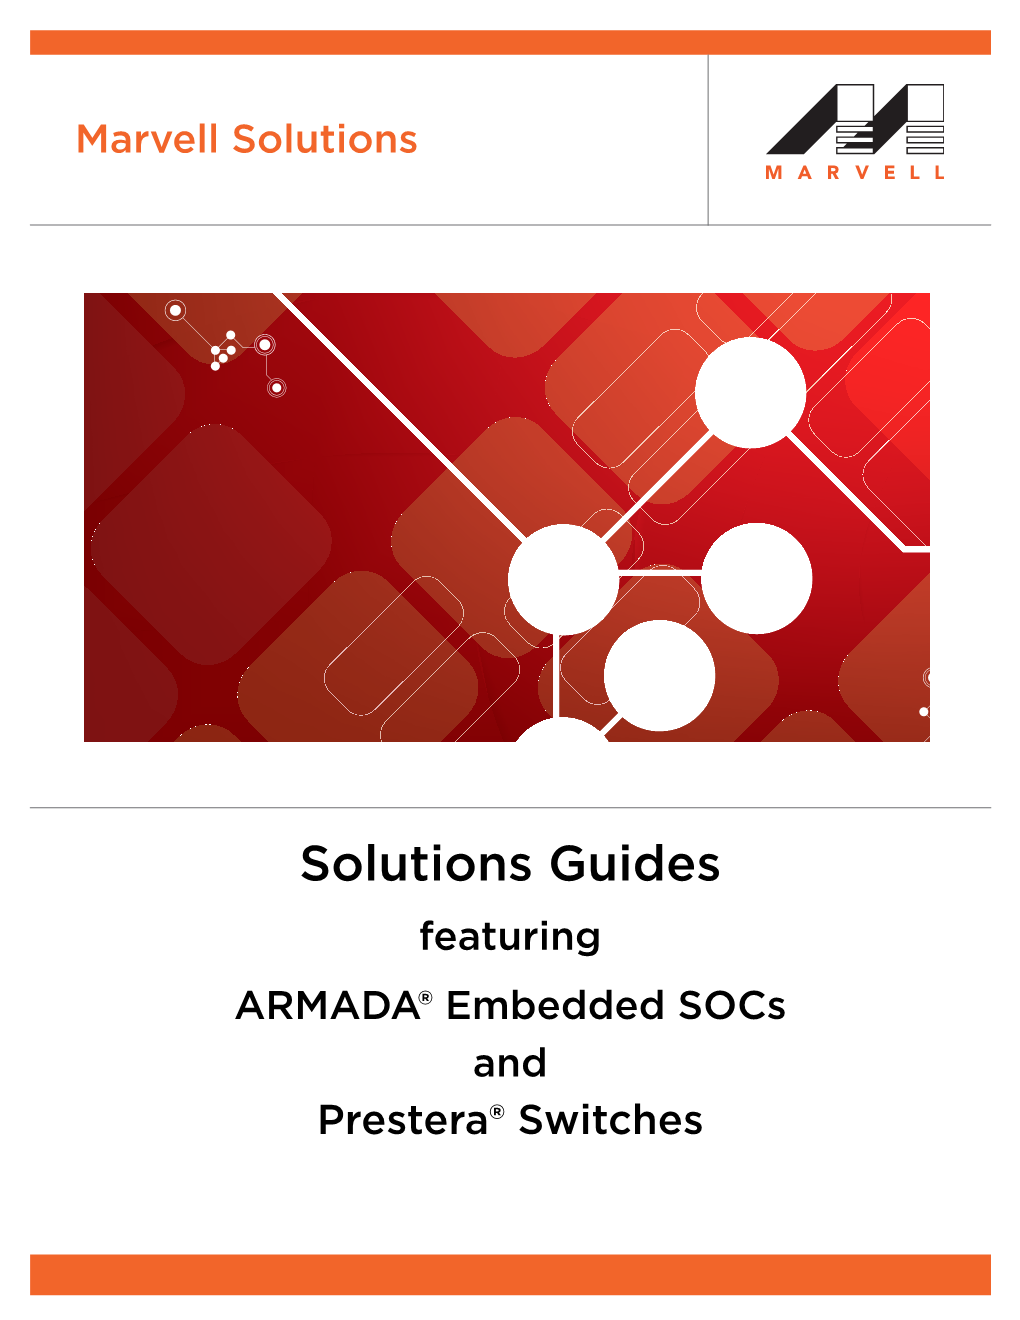 Solutions Guides Featuring ARMADA® Embedded Socs and Prestera® Switches